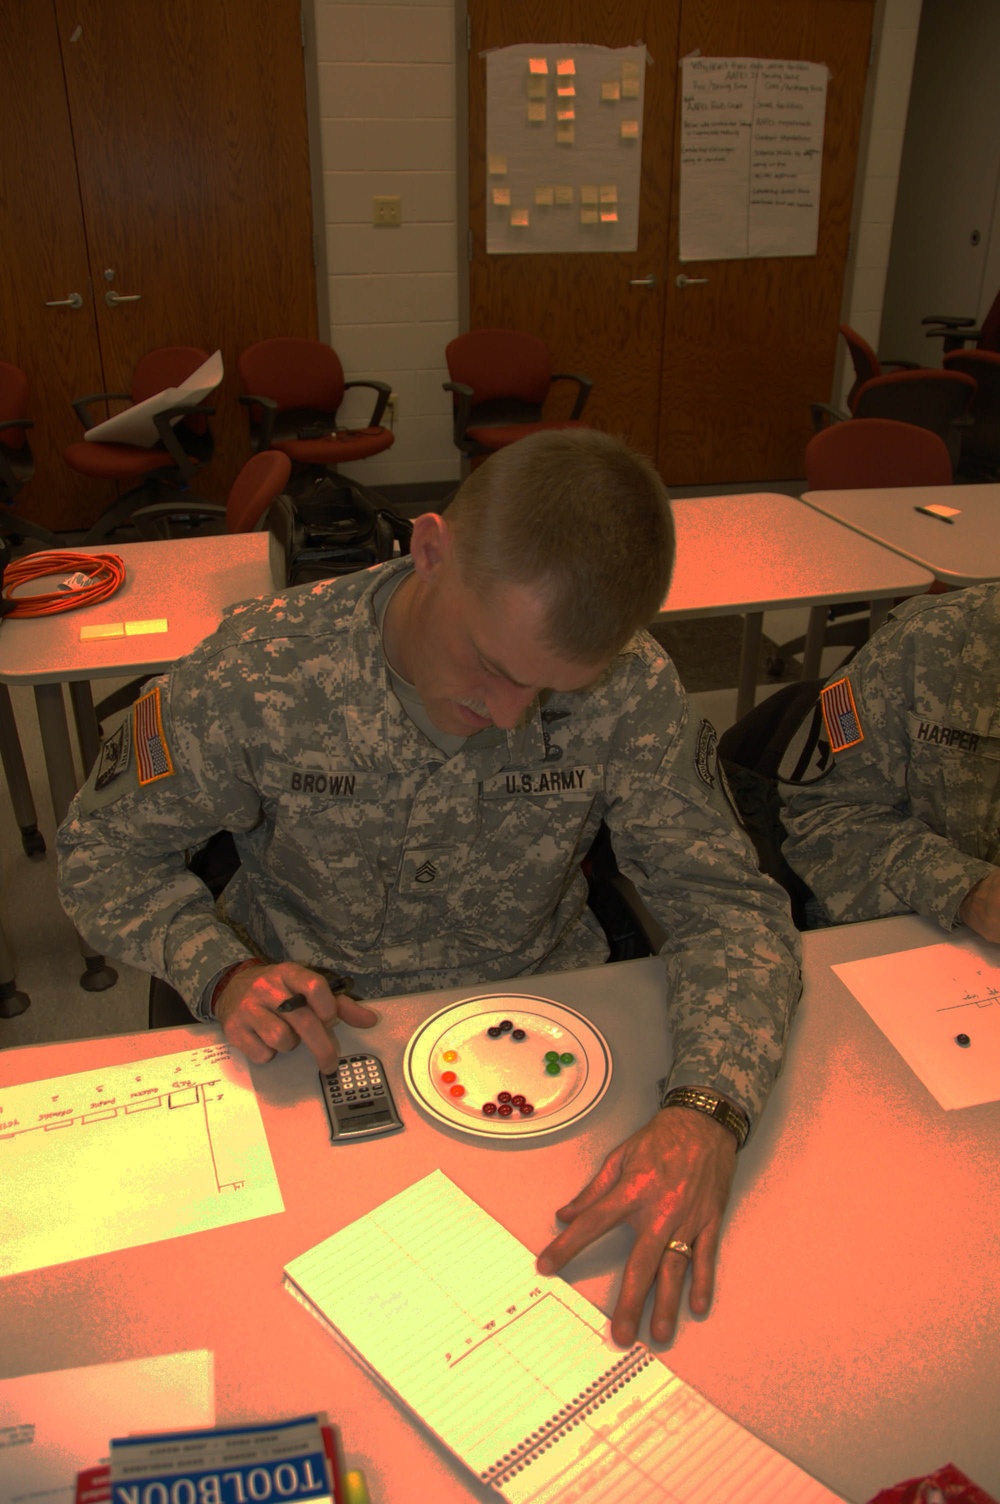 The fast and serious: Soldiers to streamline work operations using process improvement methods